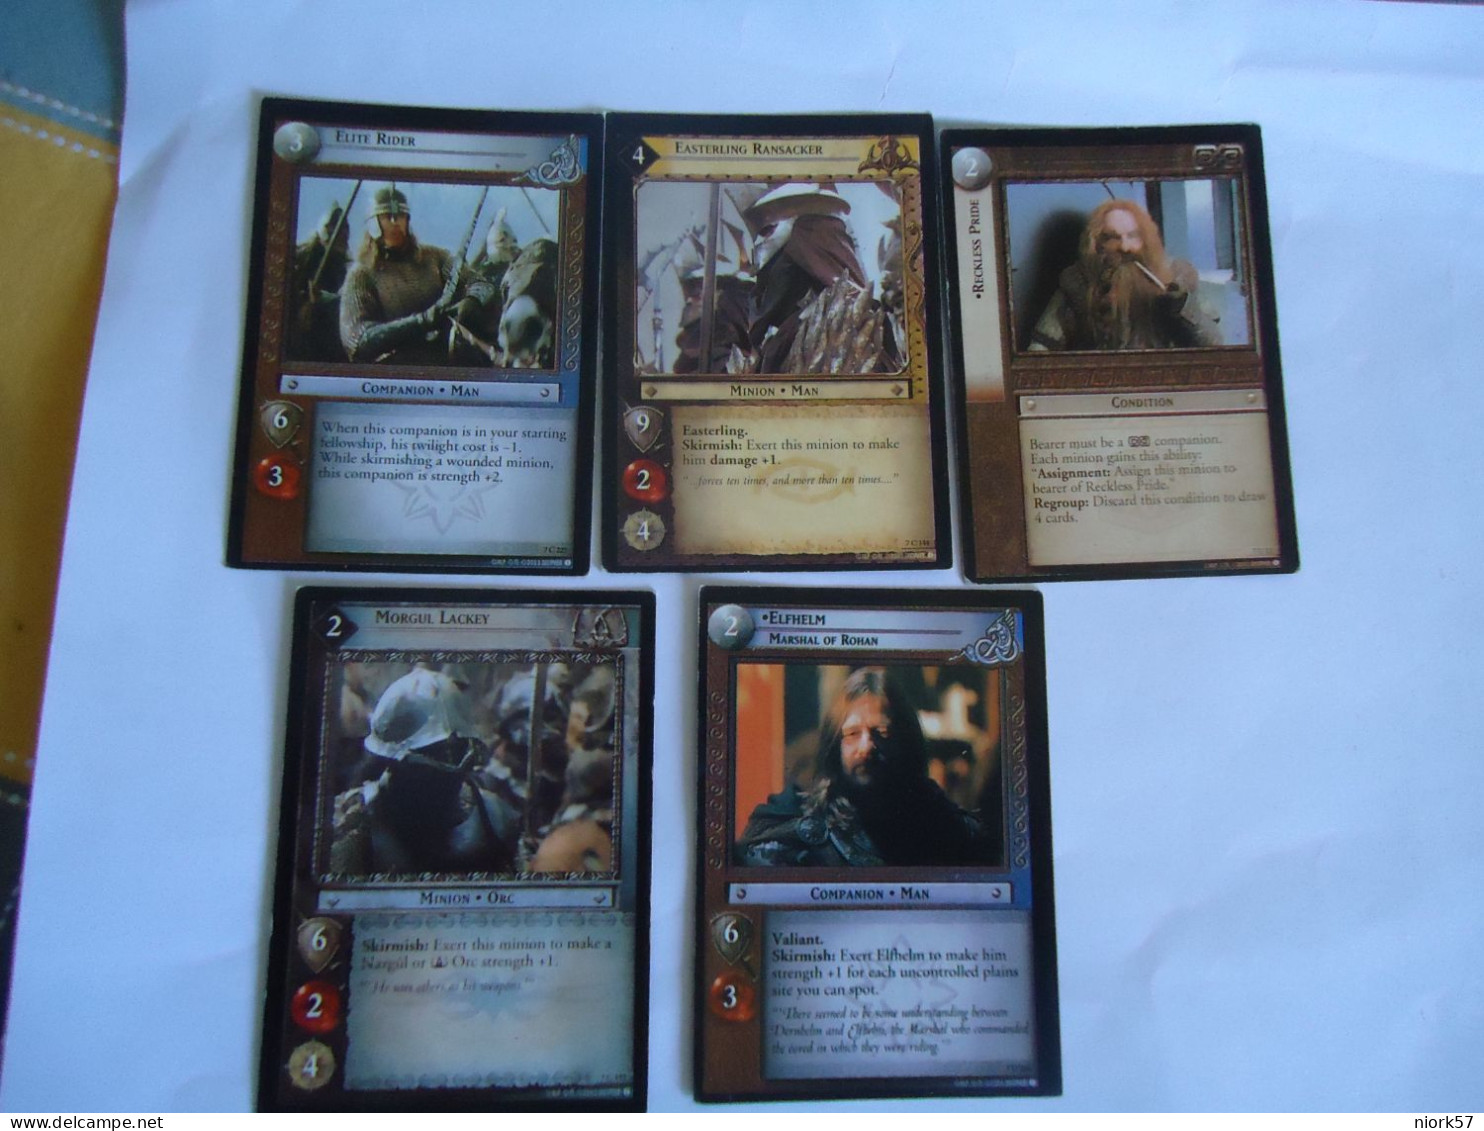 TRADING CARDS CINEMA   THE LORD OF THE RINGS 5 CARDS - Il Signore Degli Anelli